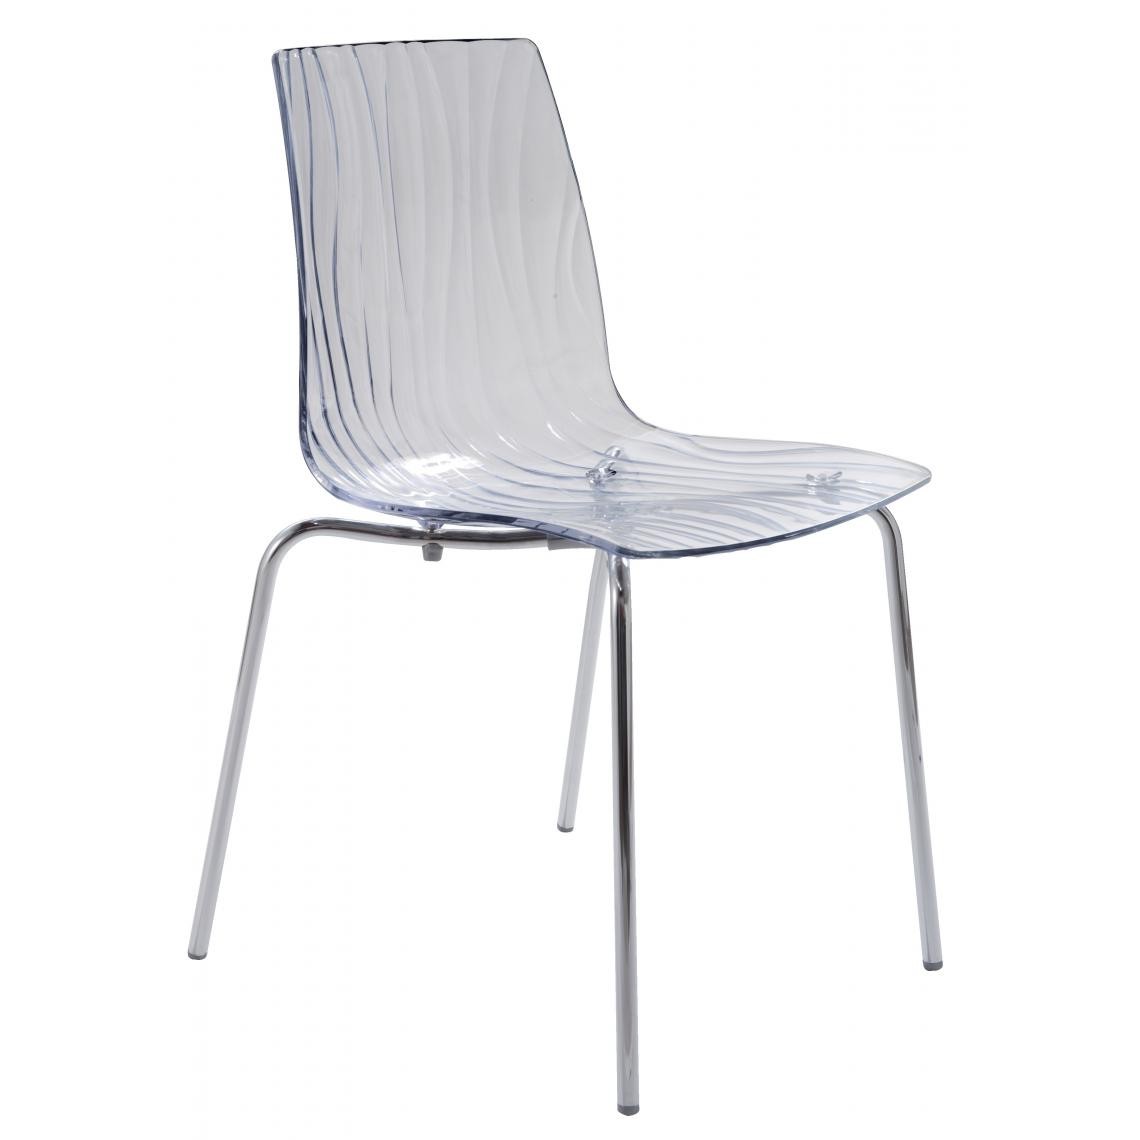 3S. x Home - Chaise Design Transparente OLYMPIE - Chaises